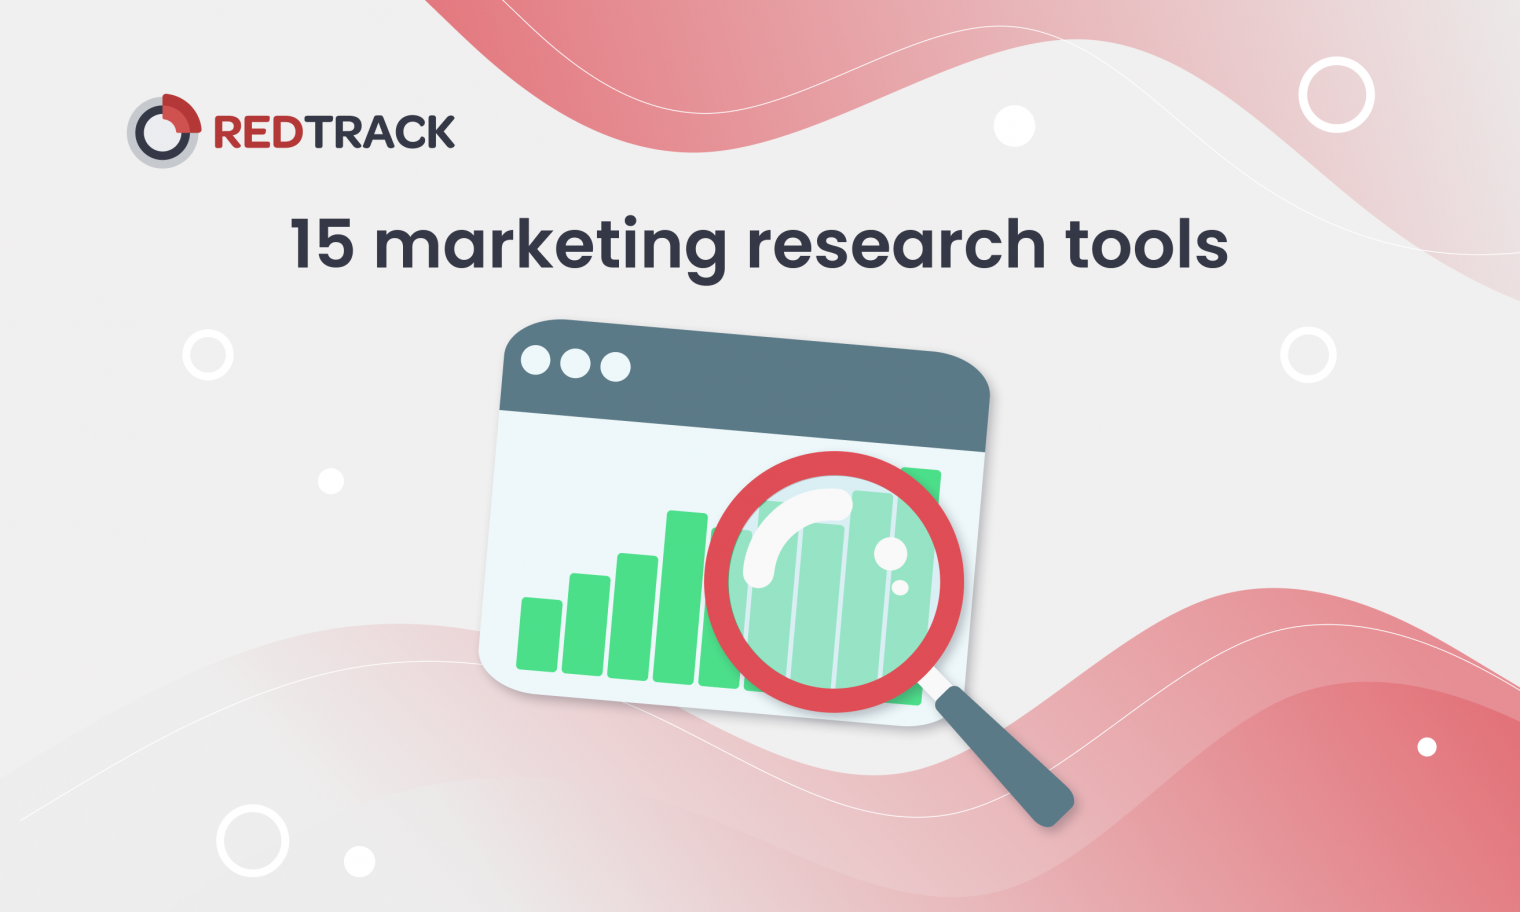 market research tools are